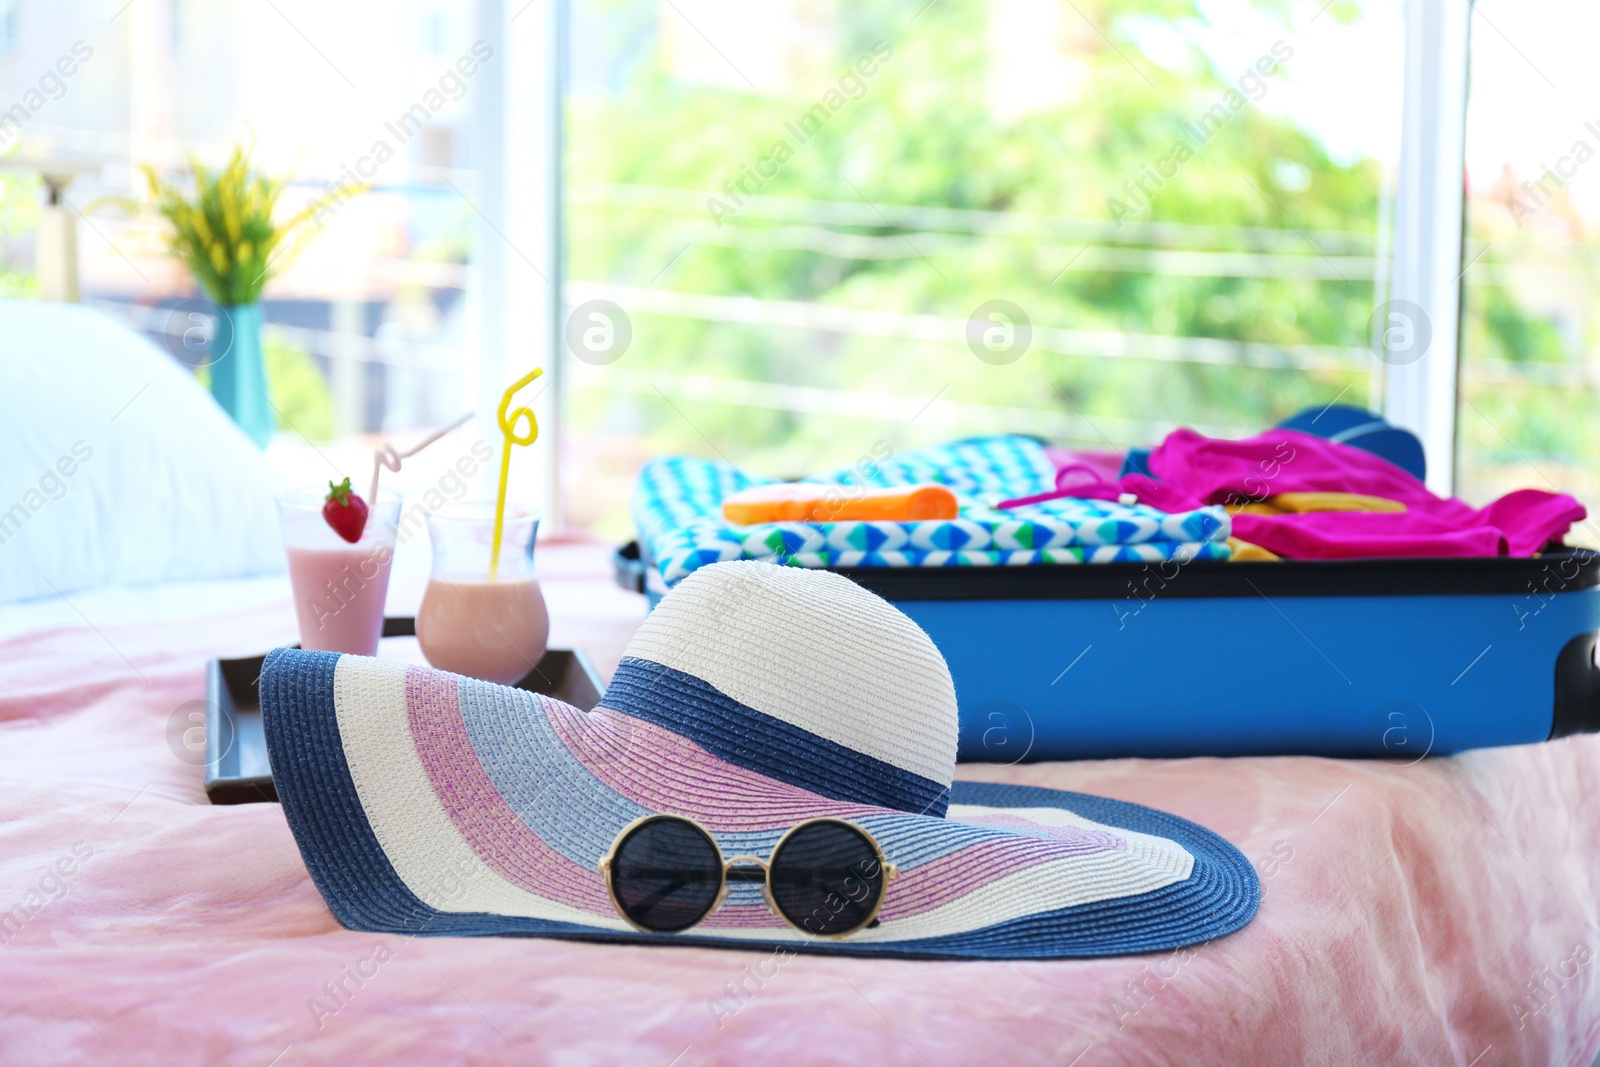 Photo of Hat with sunglasses, cocktails and open suitcase on bed indoors